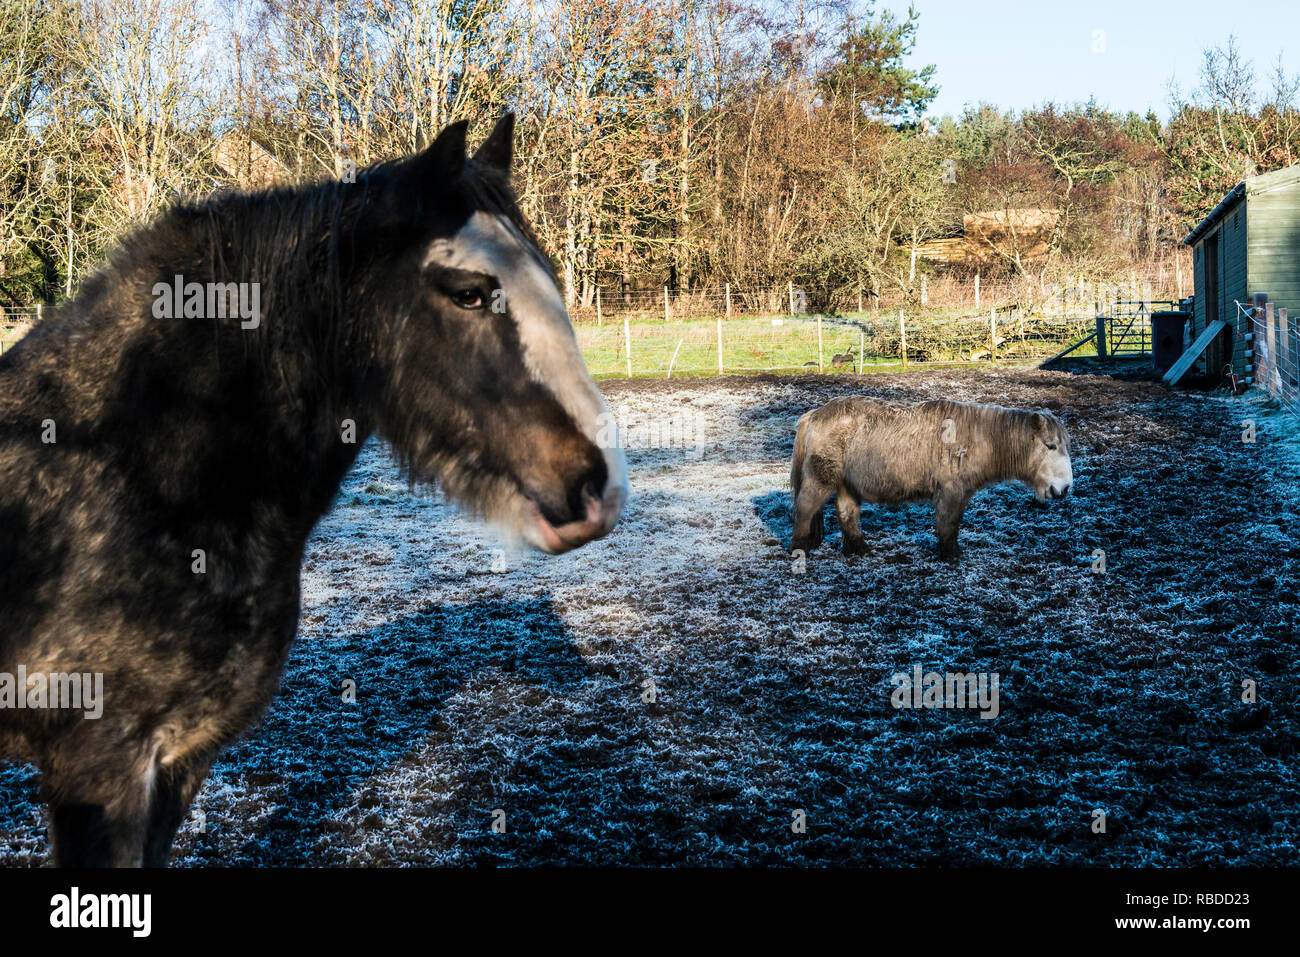 A Clydesdale horse and a Shetland pony in a frost covered field Stock Photo